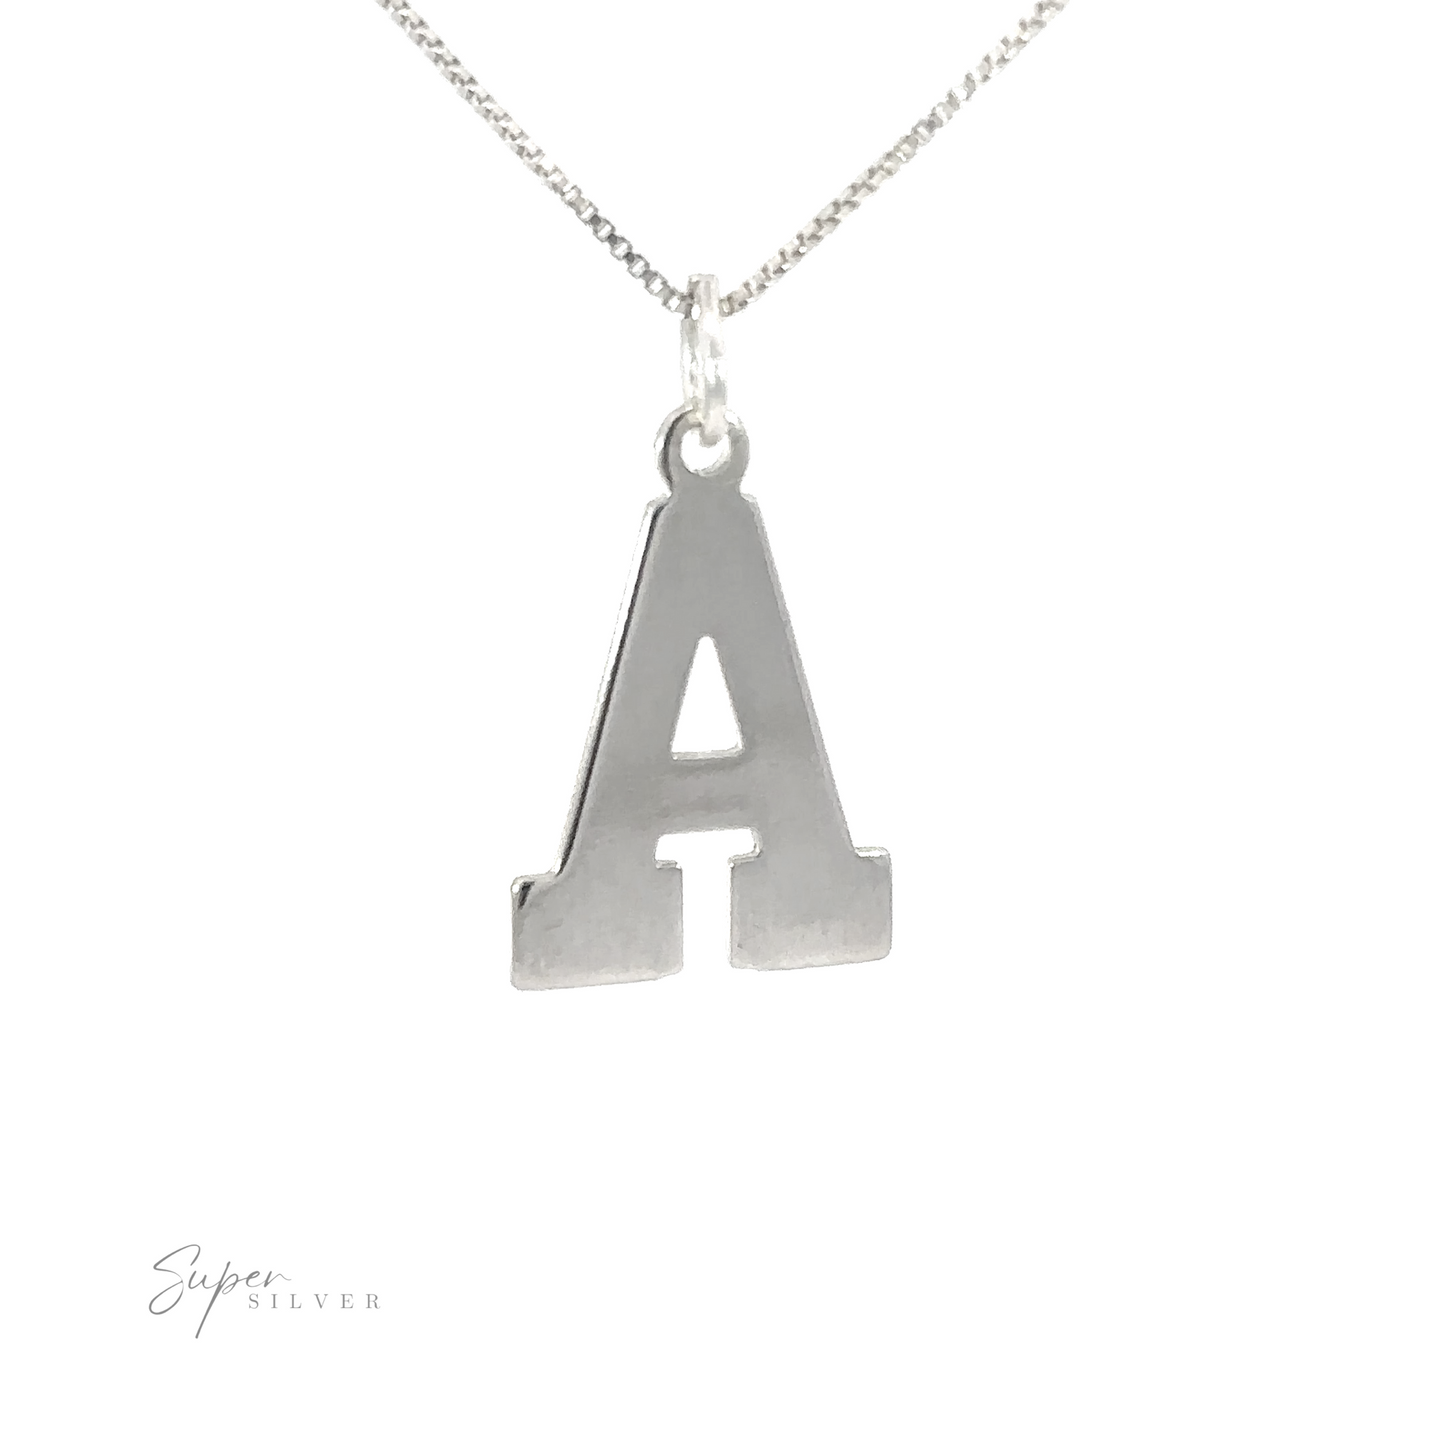 A stunning silver letter necklace on a chain, featuring .925 Sterling Silver and offering personalization with Alphabet Charms.